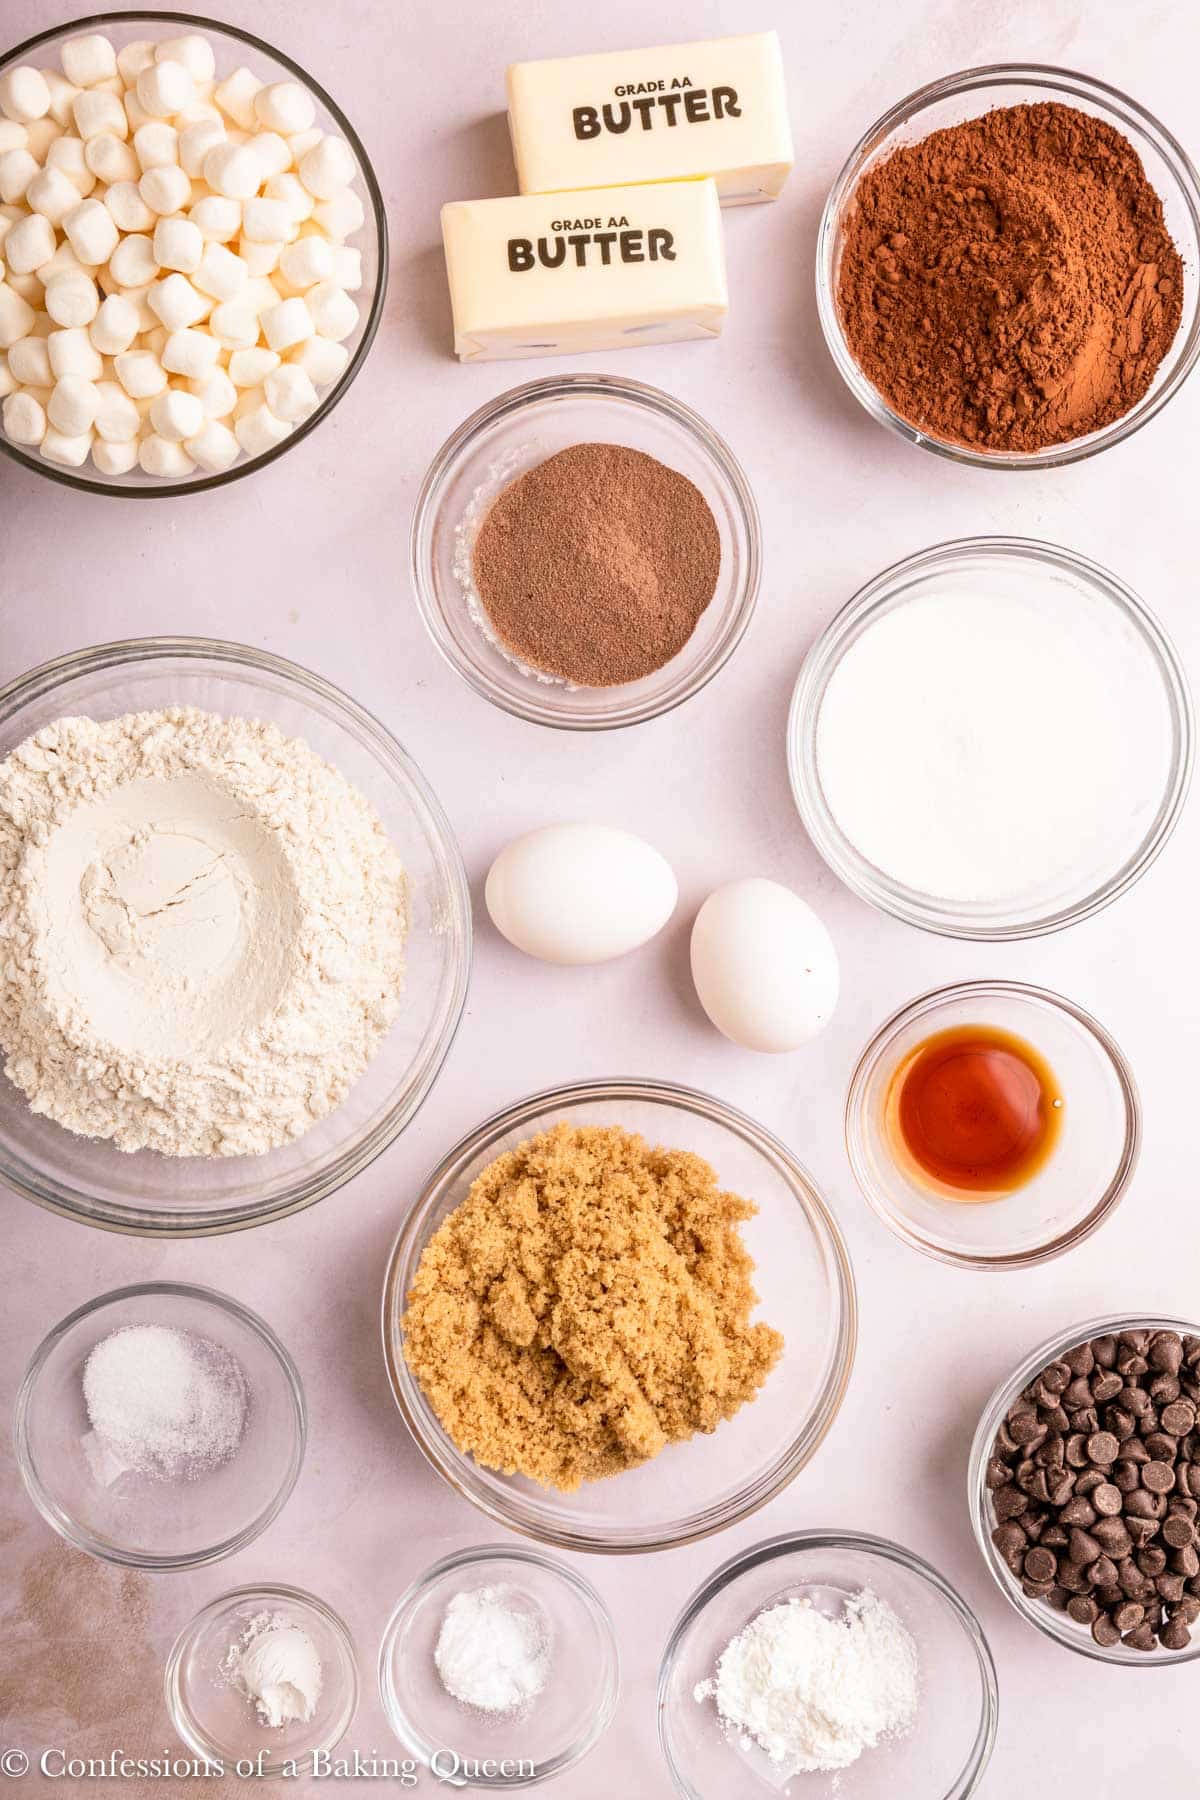 ingredients for hot chocolate cookies in small bowls on a light surface